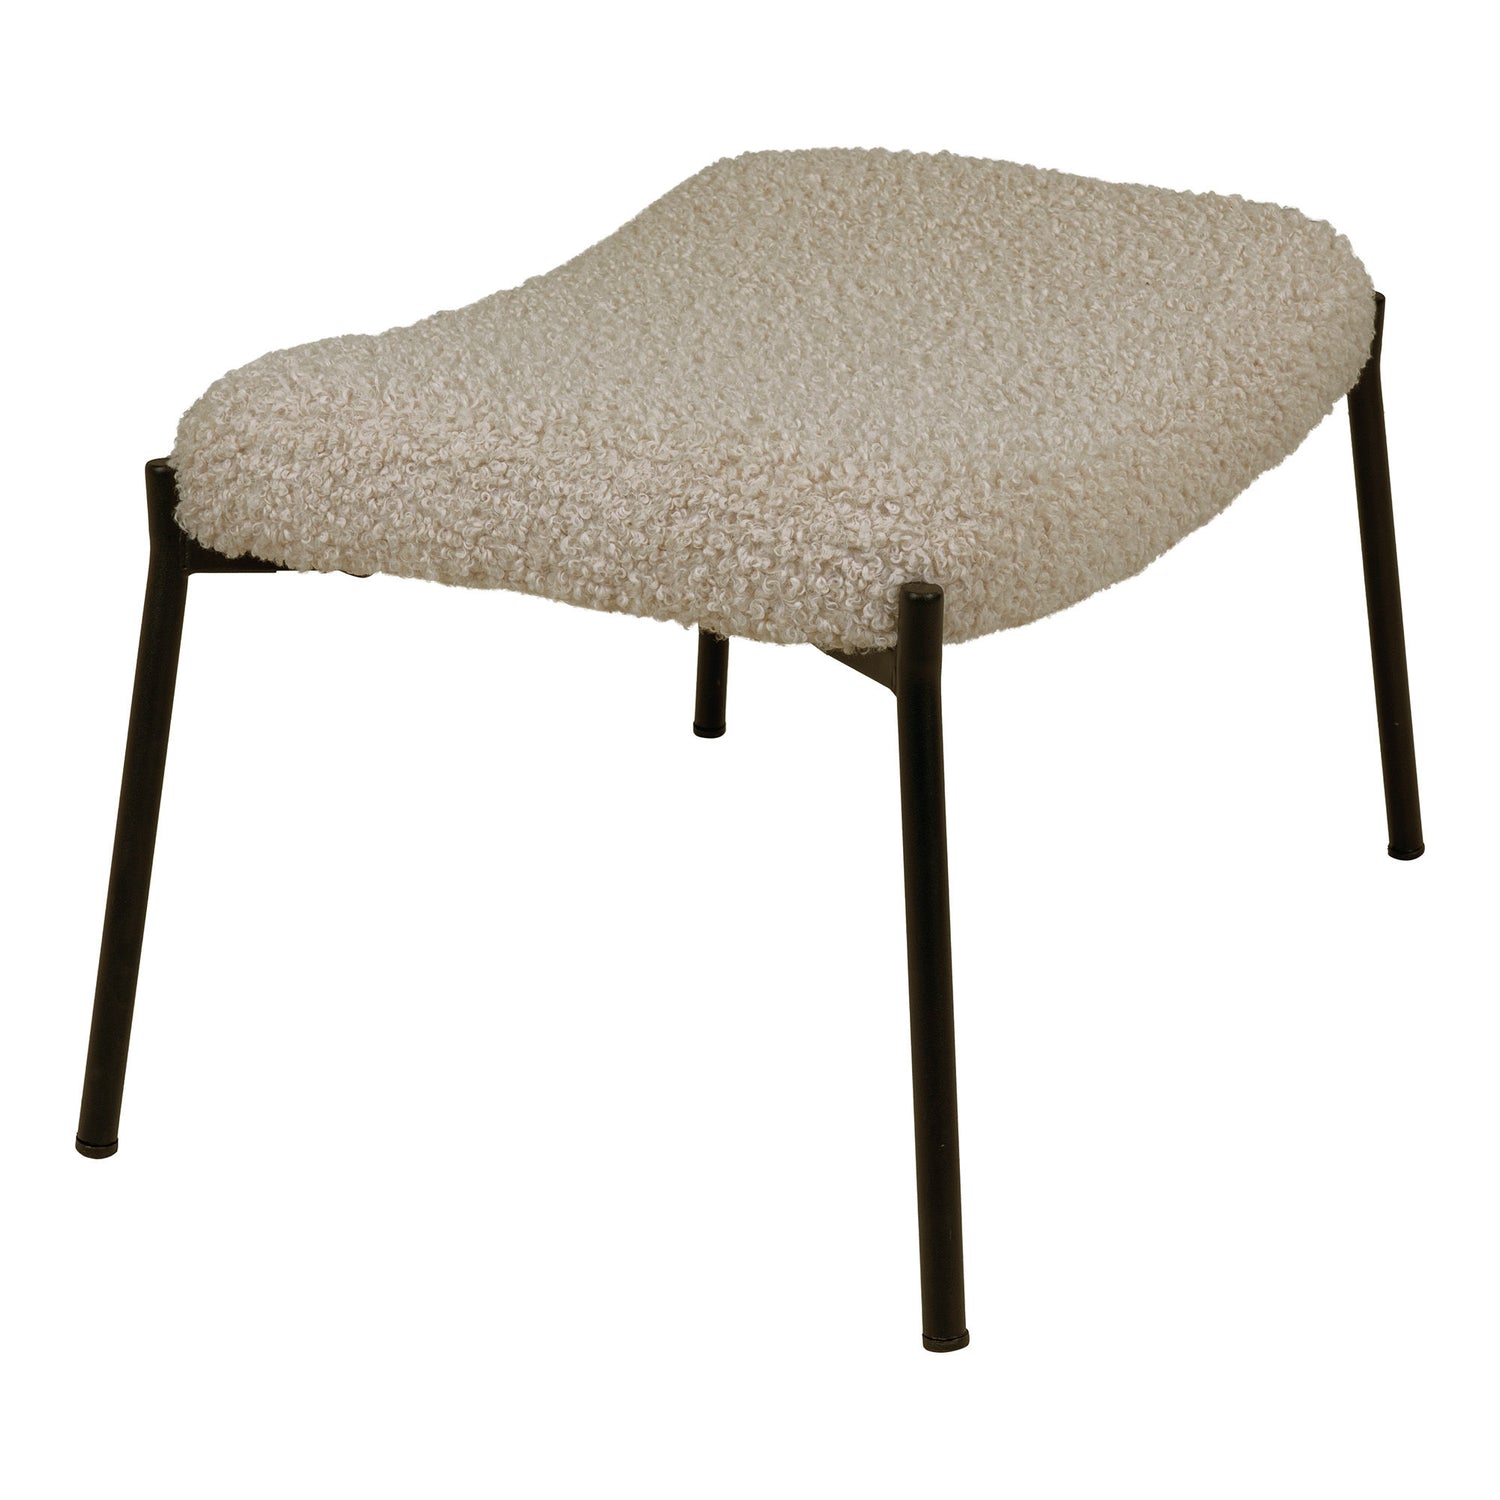 House Nordic - Glasgow Foot Stool